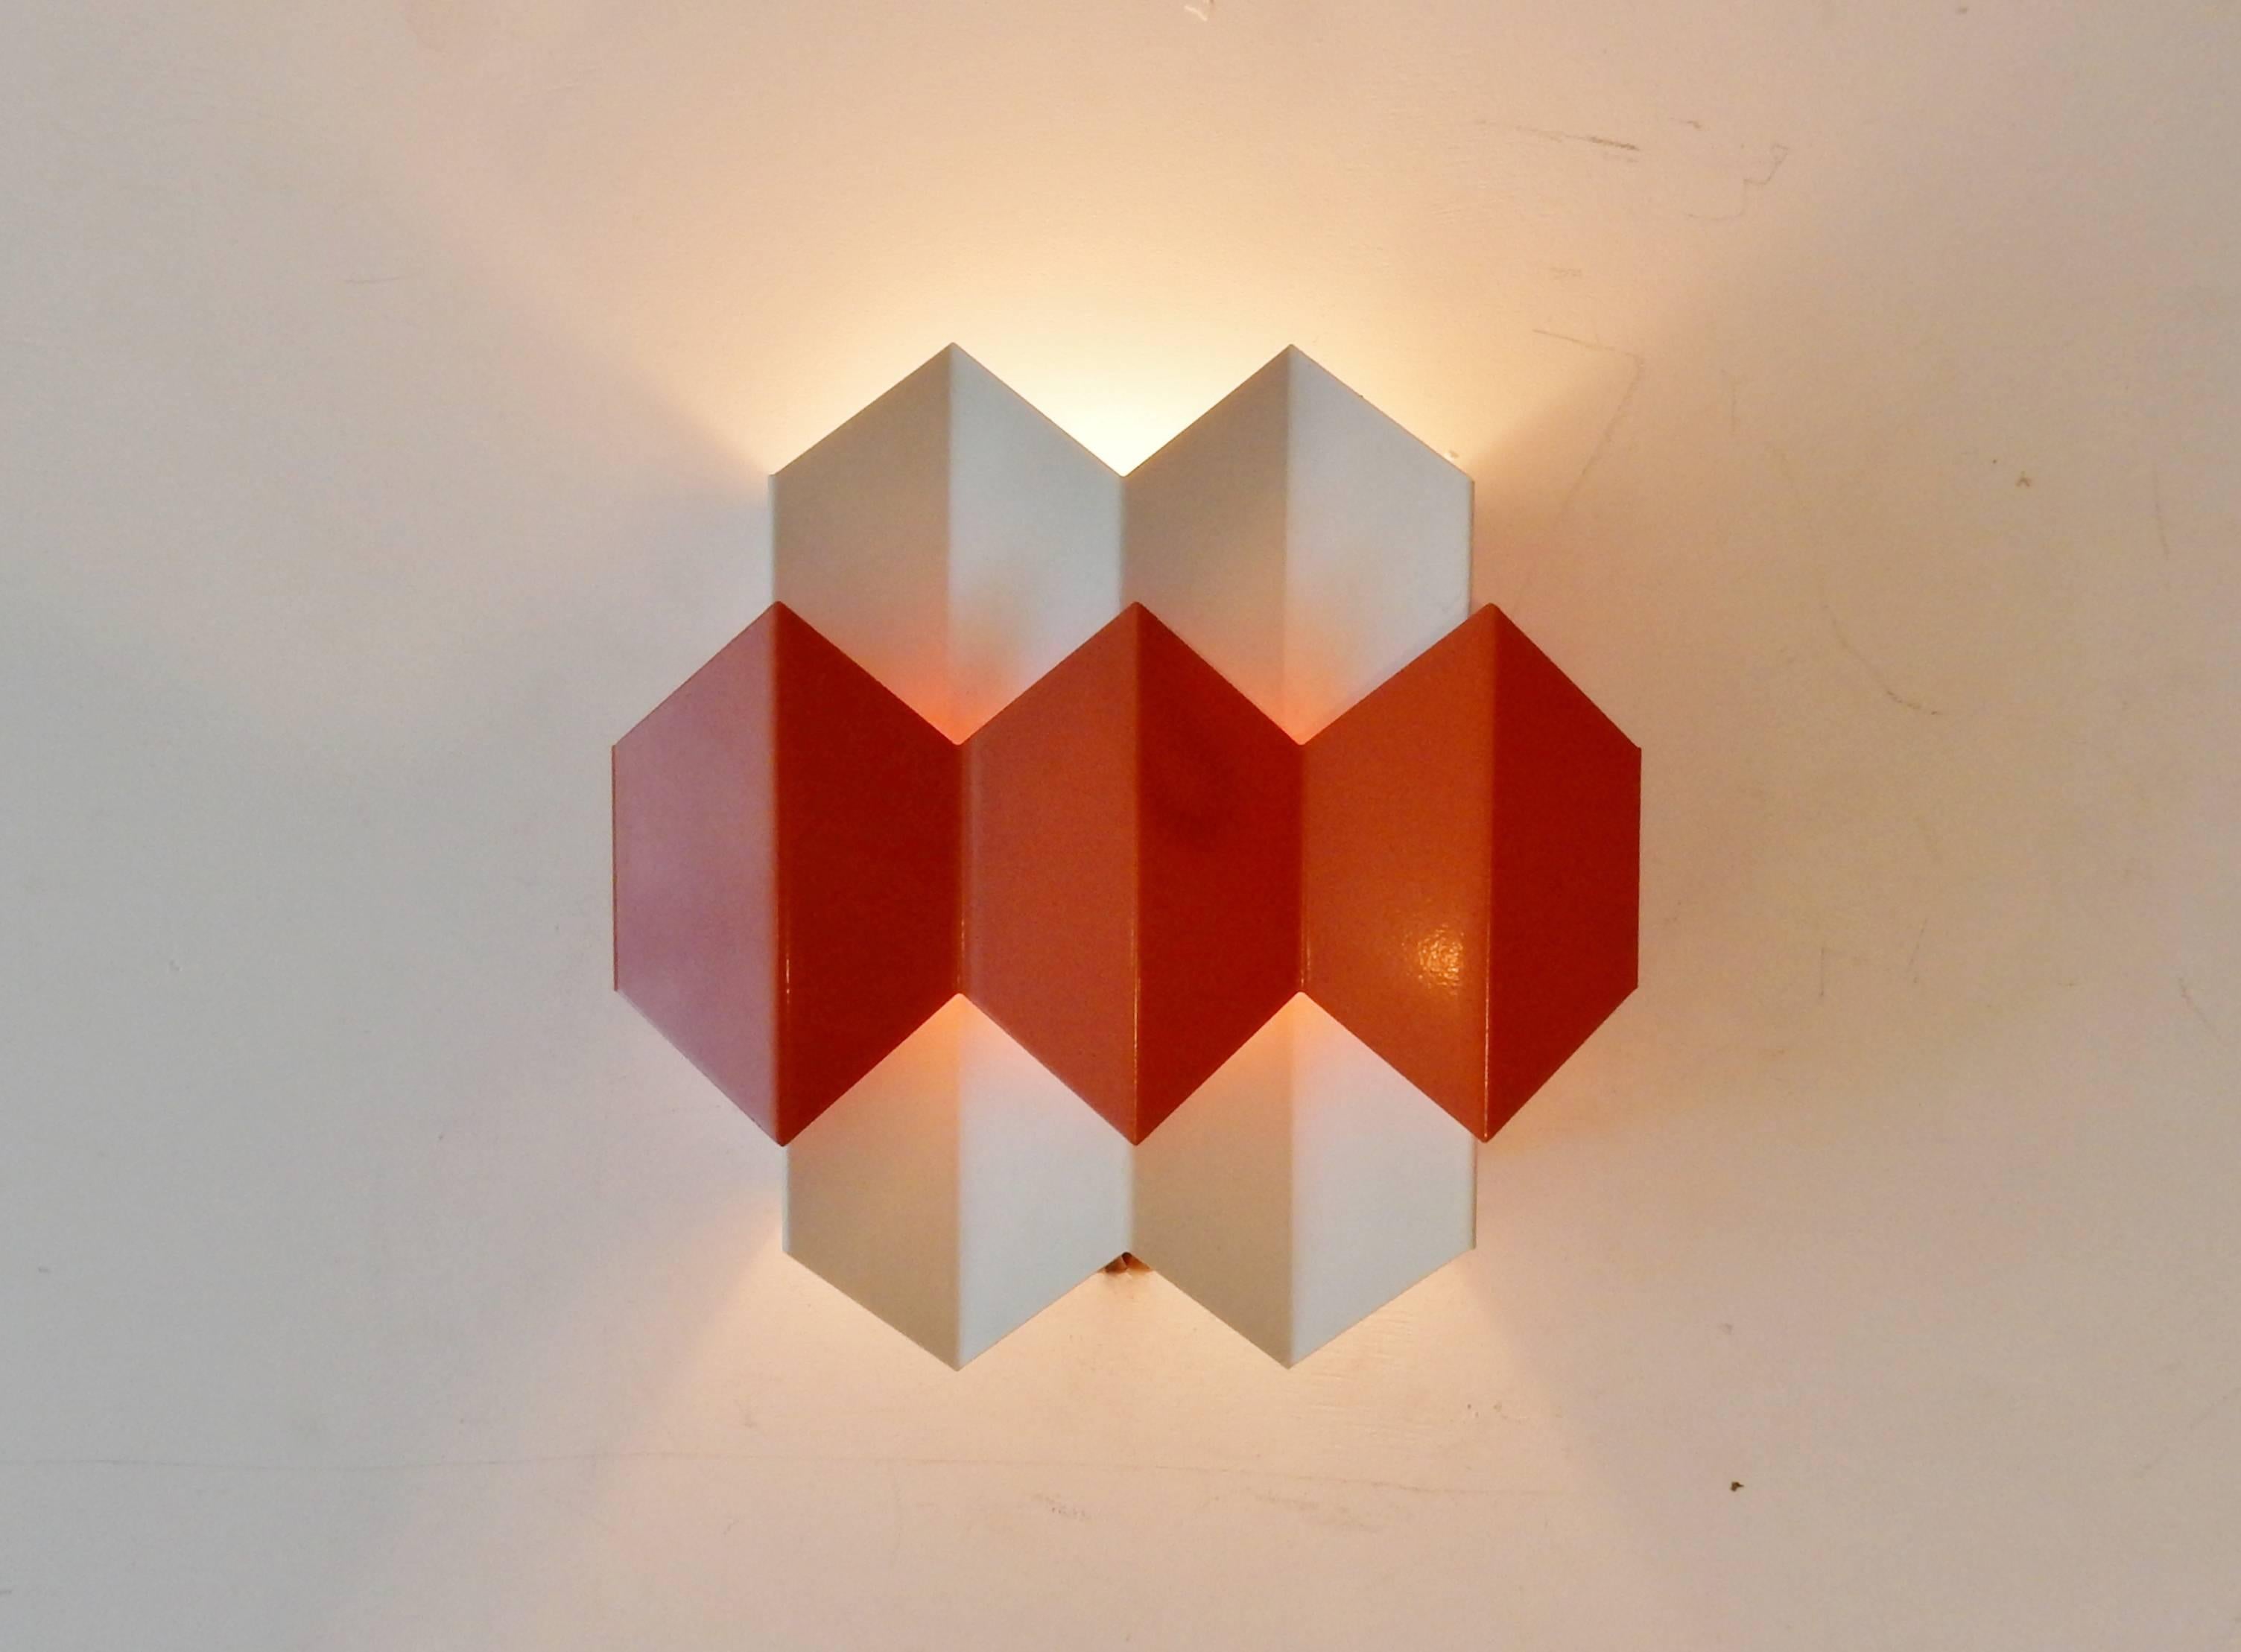 These wall lights are quite rare to come by. With the playfulness of the colors and Bent Karlby as a major designer for Lyfa, these could very likely be from his hand. Although Simon Henningsen and Ole Panton come to mind as well. Both are in a very